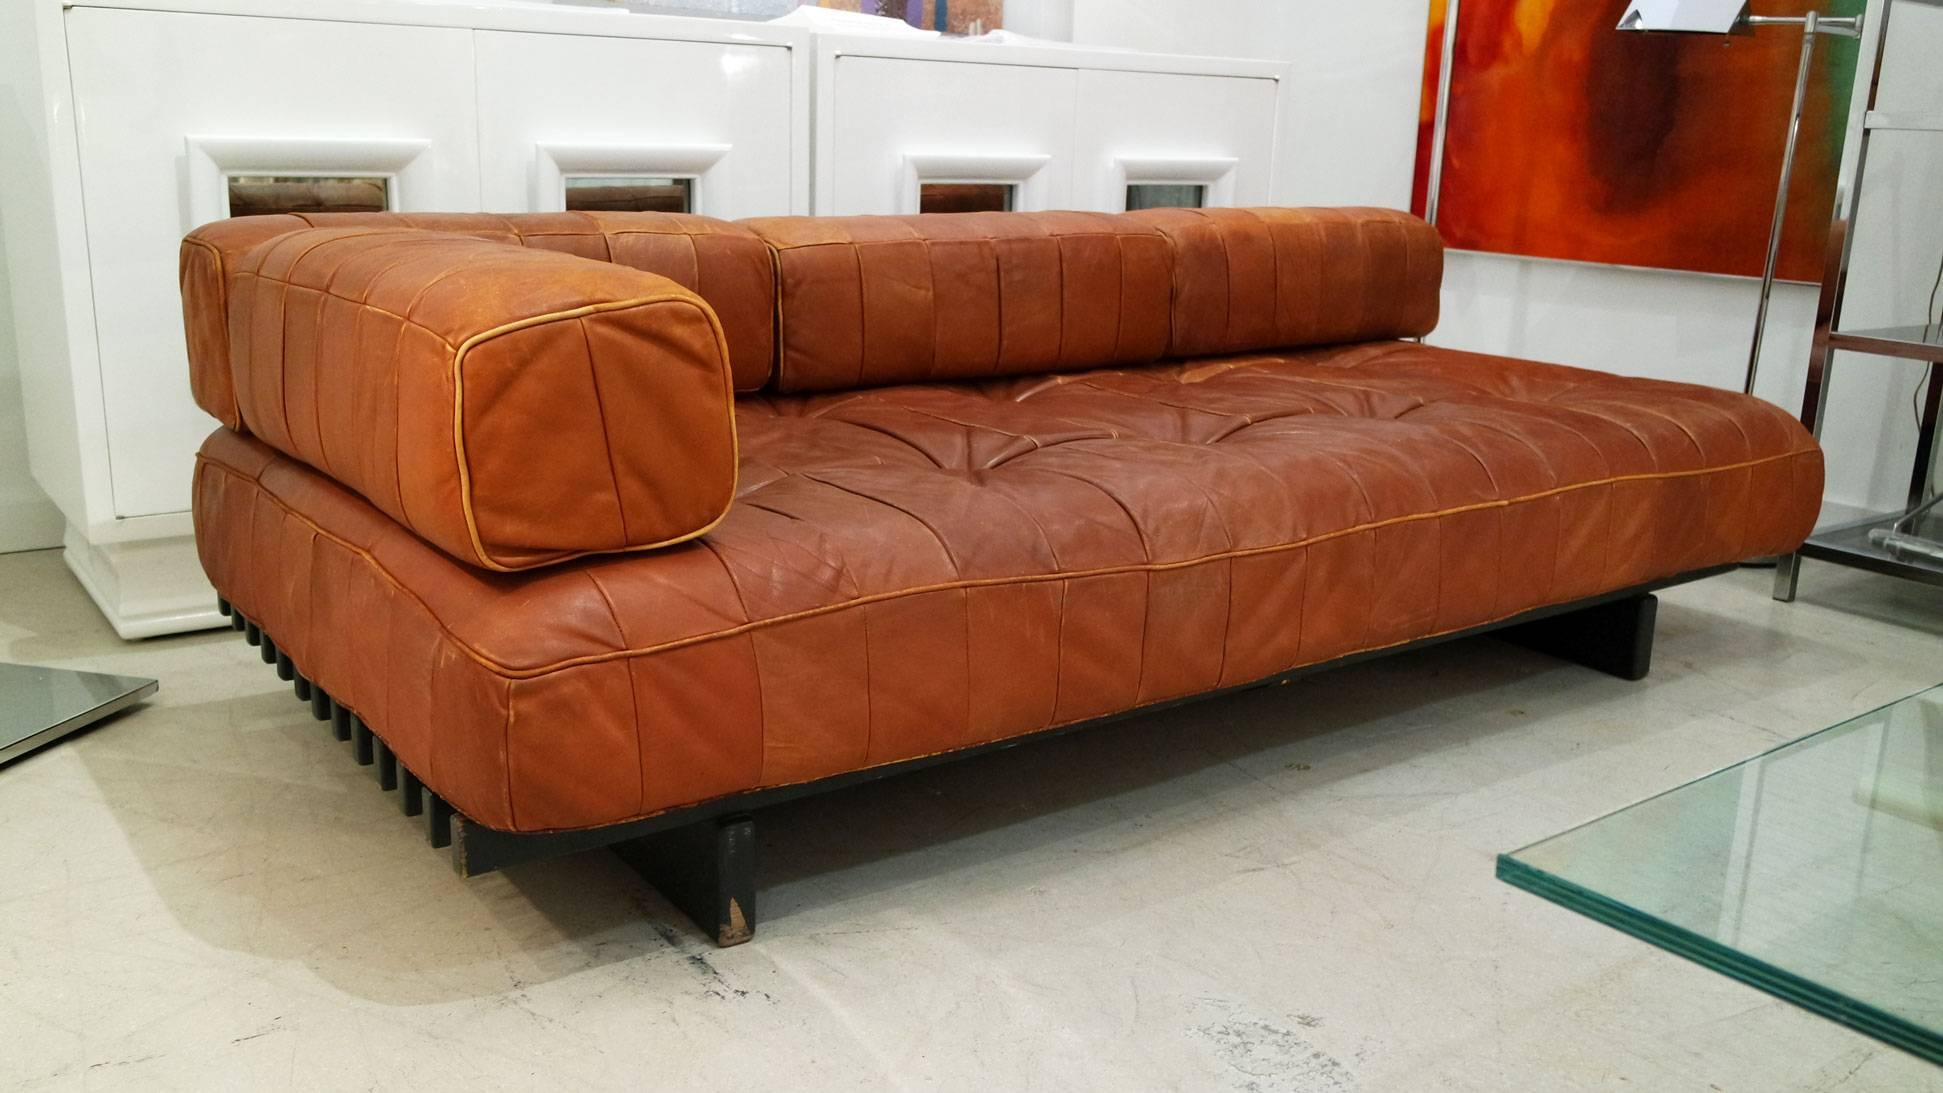 Vintage cognac colored leather daybed by De Sede of Switzerland. The daybed has modular back cushions which rest on a black slat wood platform. All the leather is in good condition without rips or tears but attractive signs of age. It has been